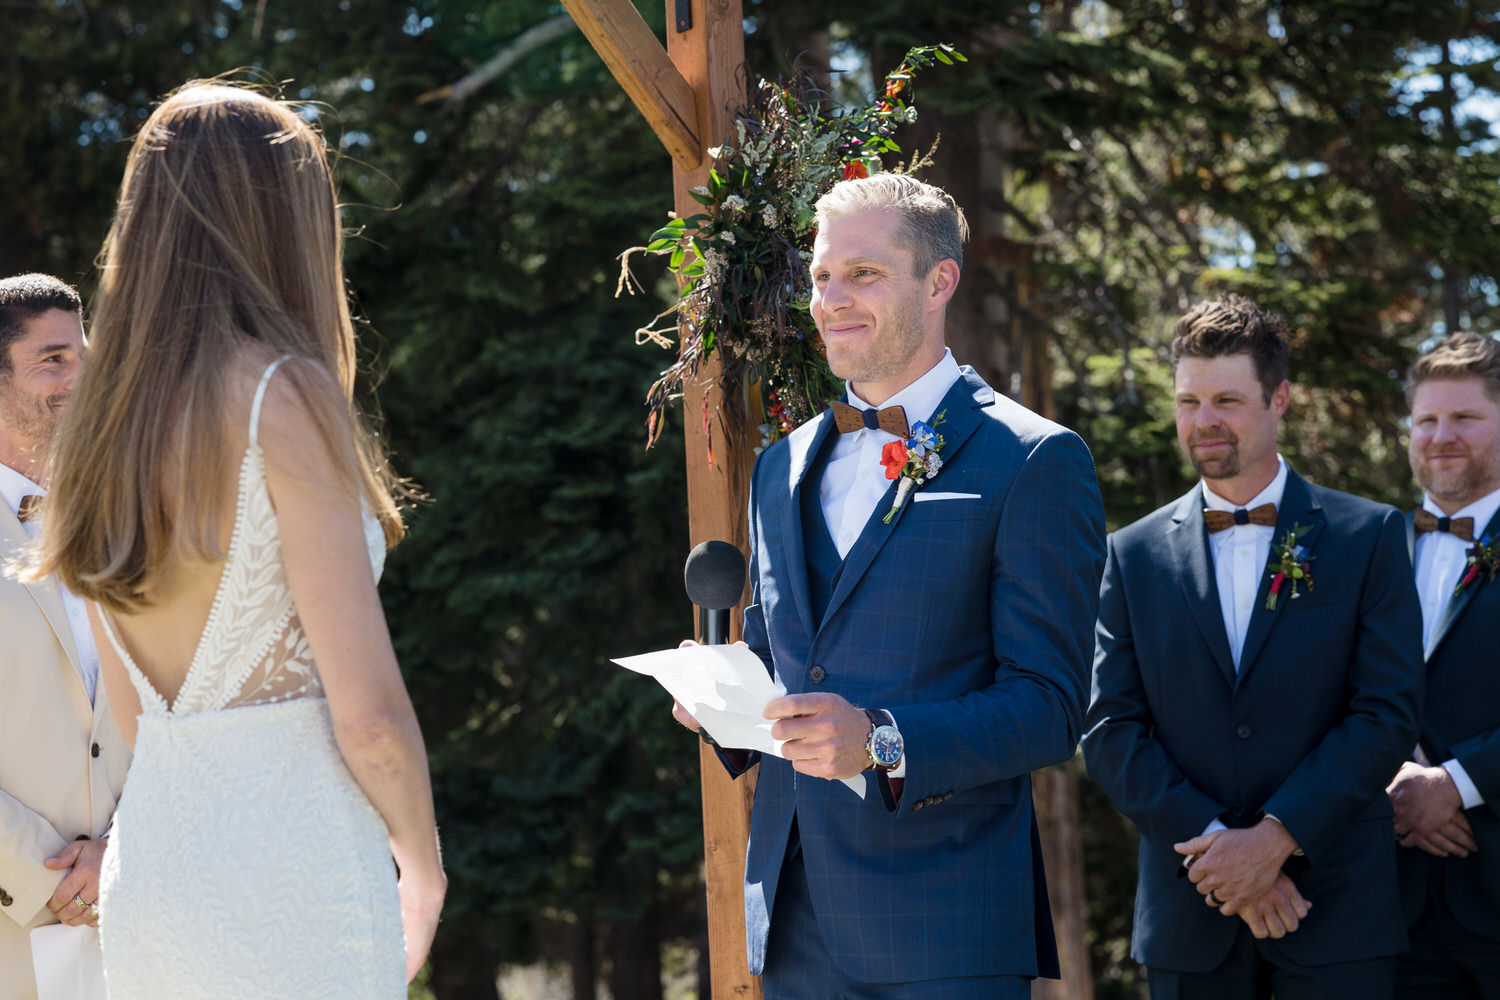 A sincere moment as the groom reads hand-written vows during the ceremony.